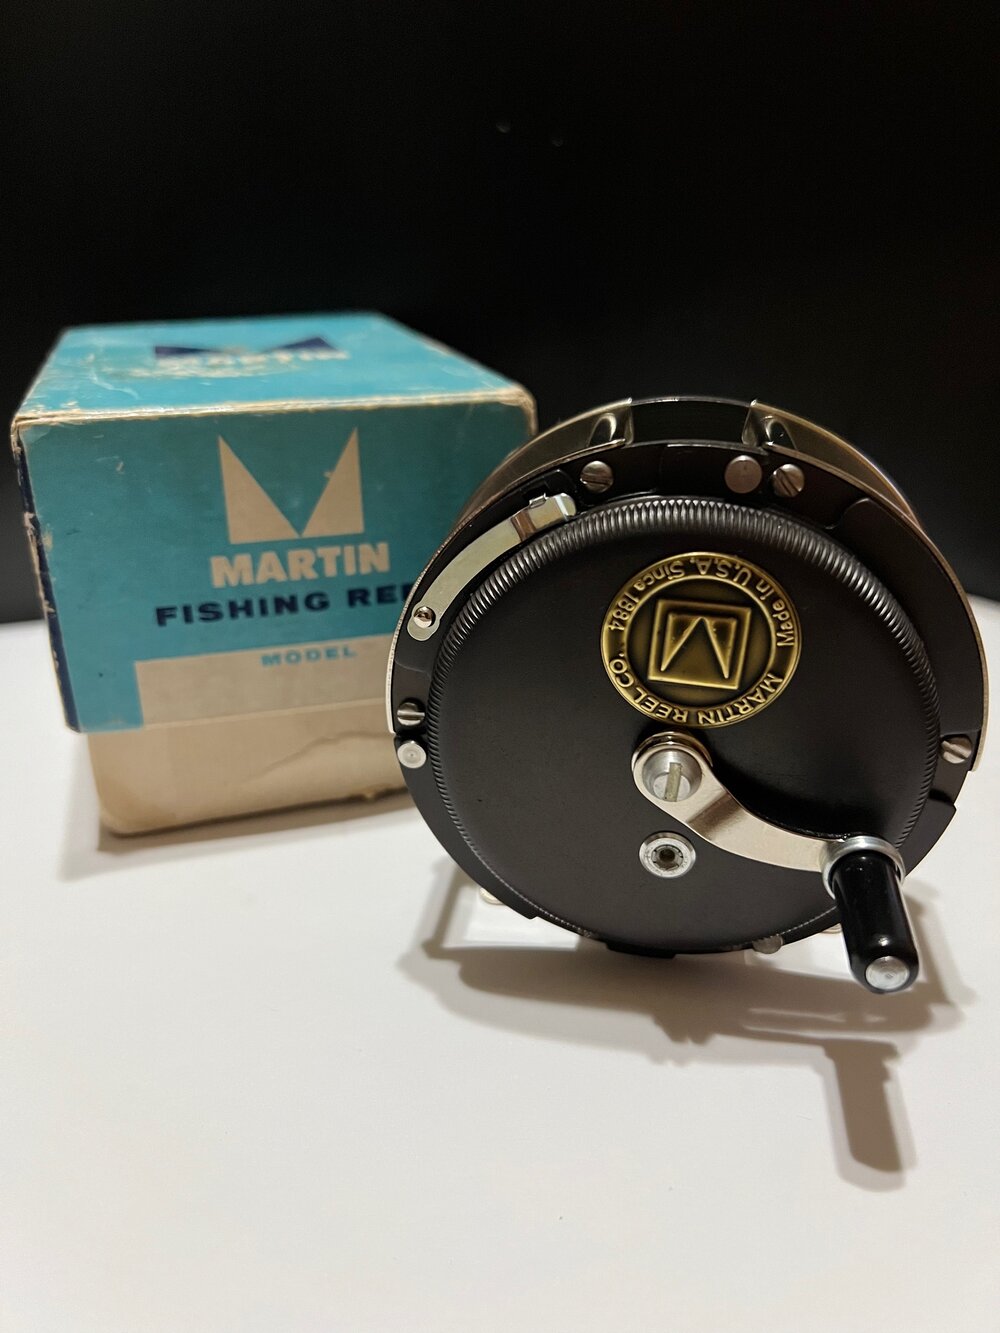 Martin No. #72 Fly fishing Reel Left & Right use with Original Box